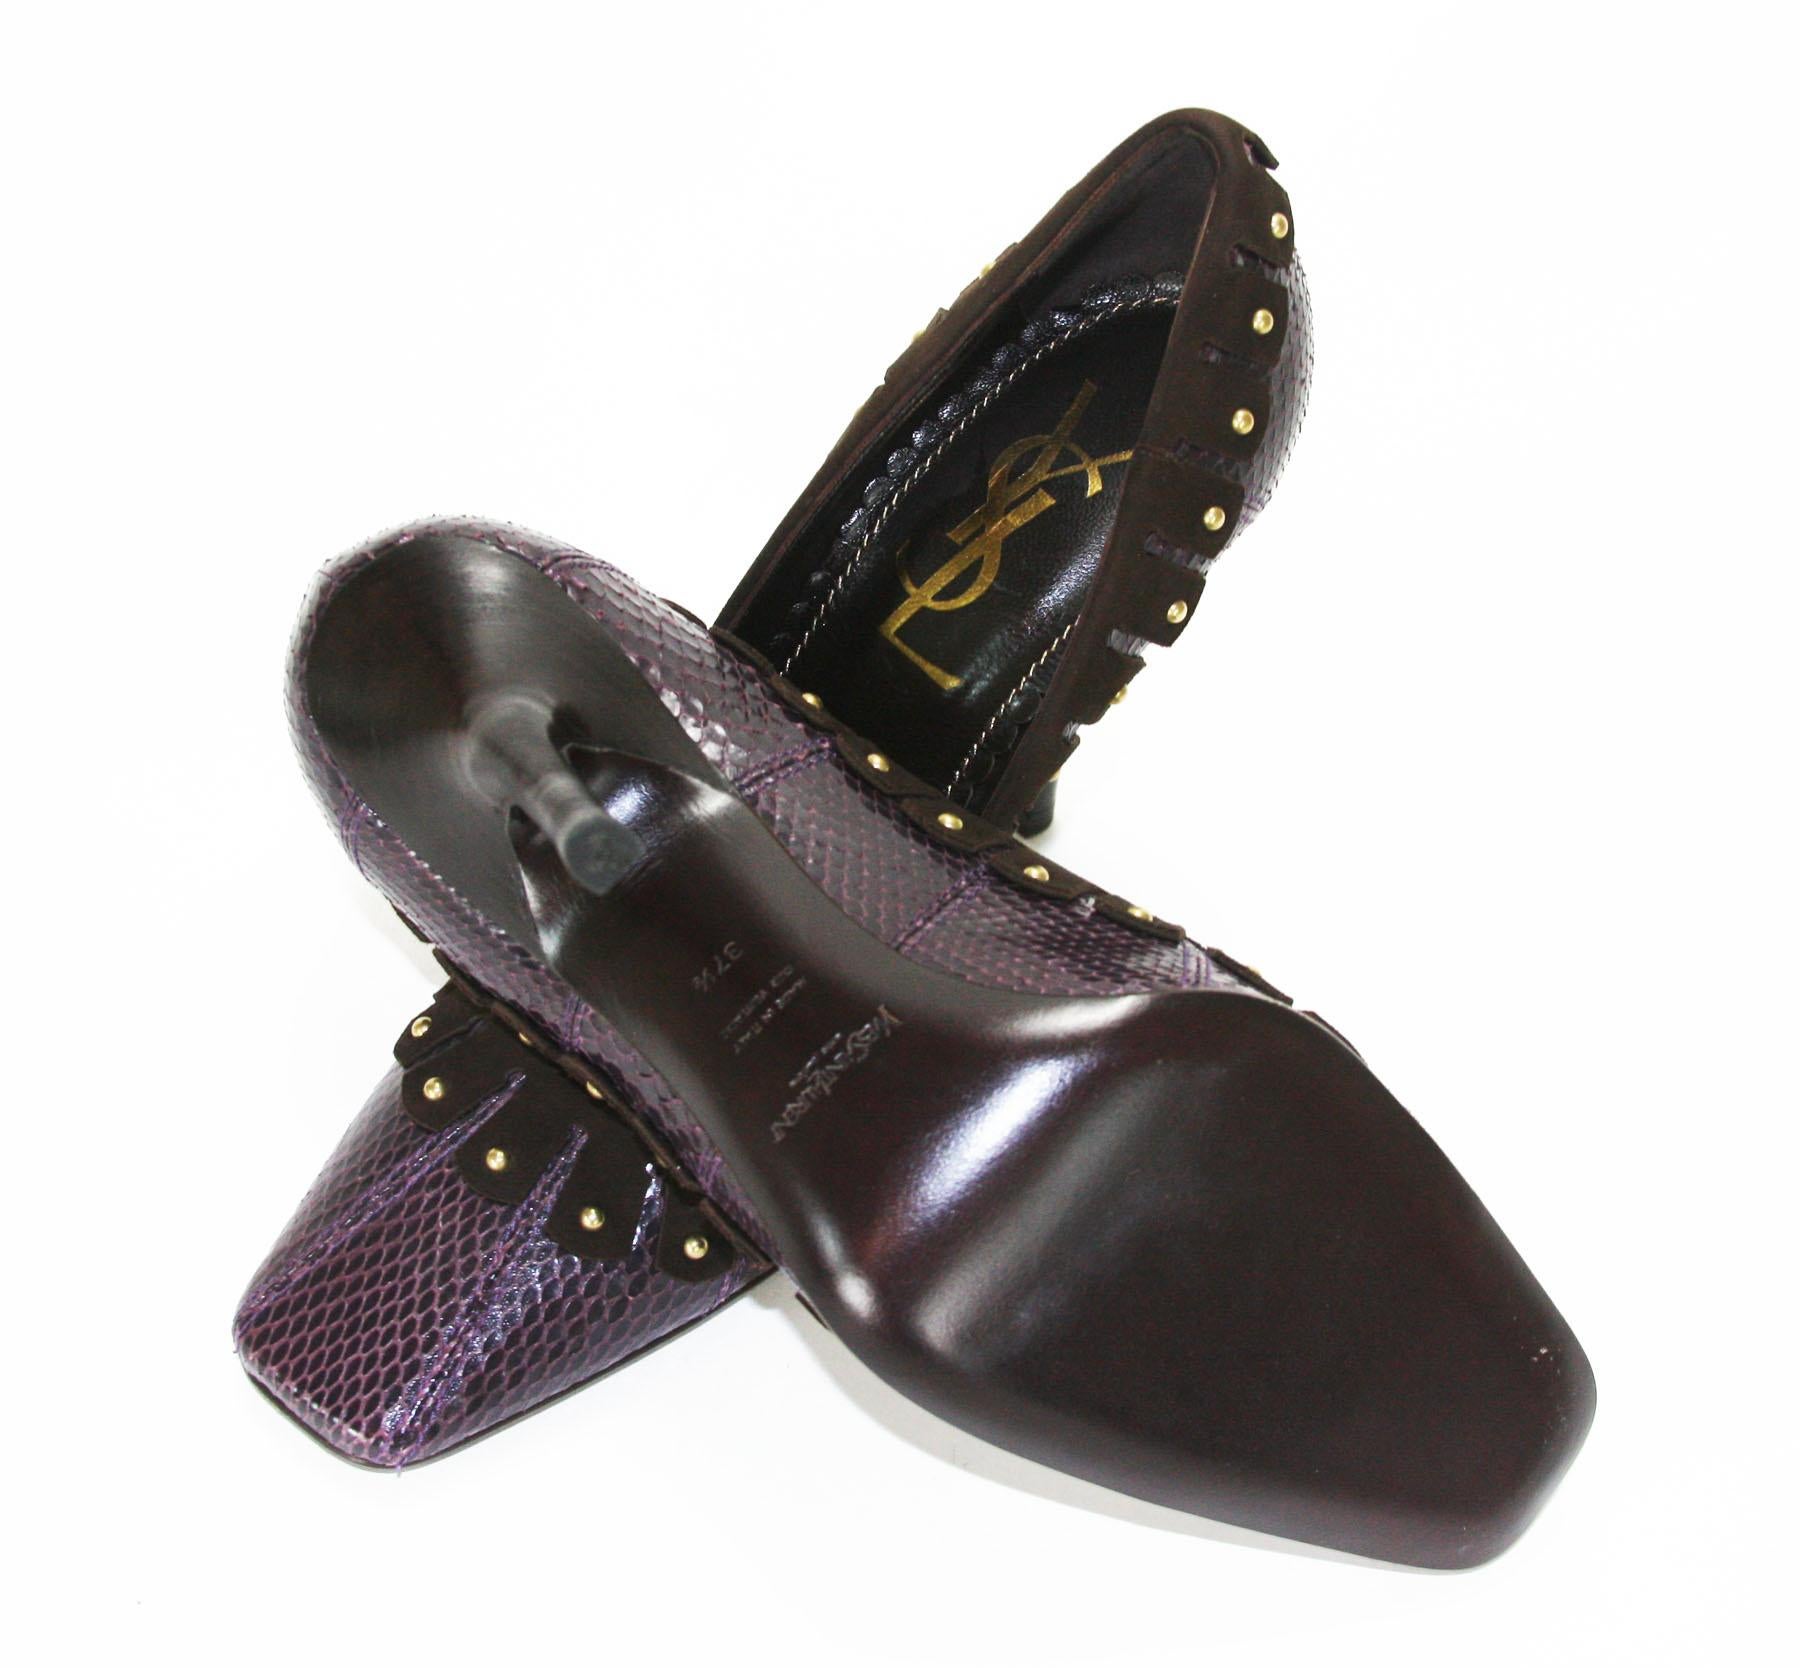 New Tom Ford for Yves Saint Laurent Snake Studded Plum Pumps Shoes 37.5  US 7.5 In New Condition For Sale In Montgomery, TX